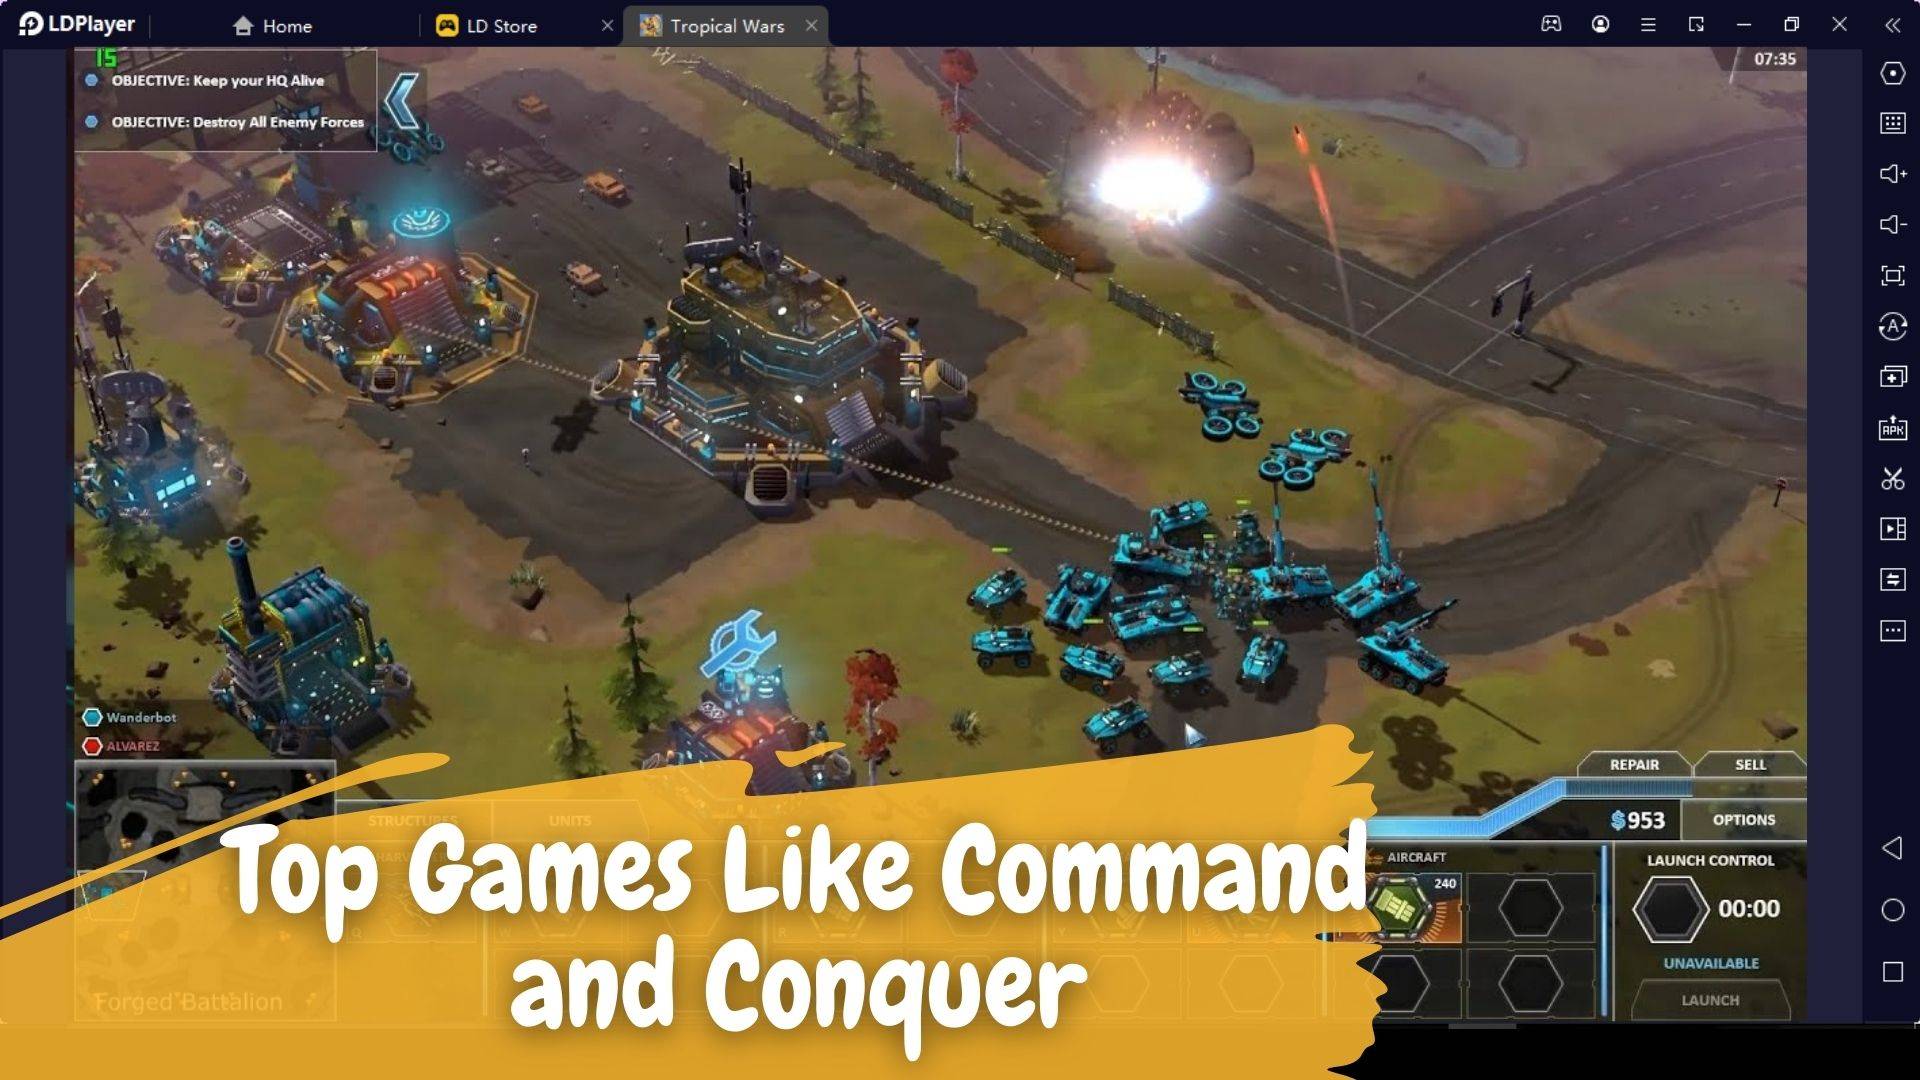 Top Games Like Command and Conquer